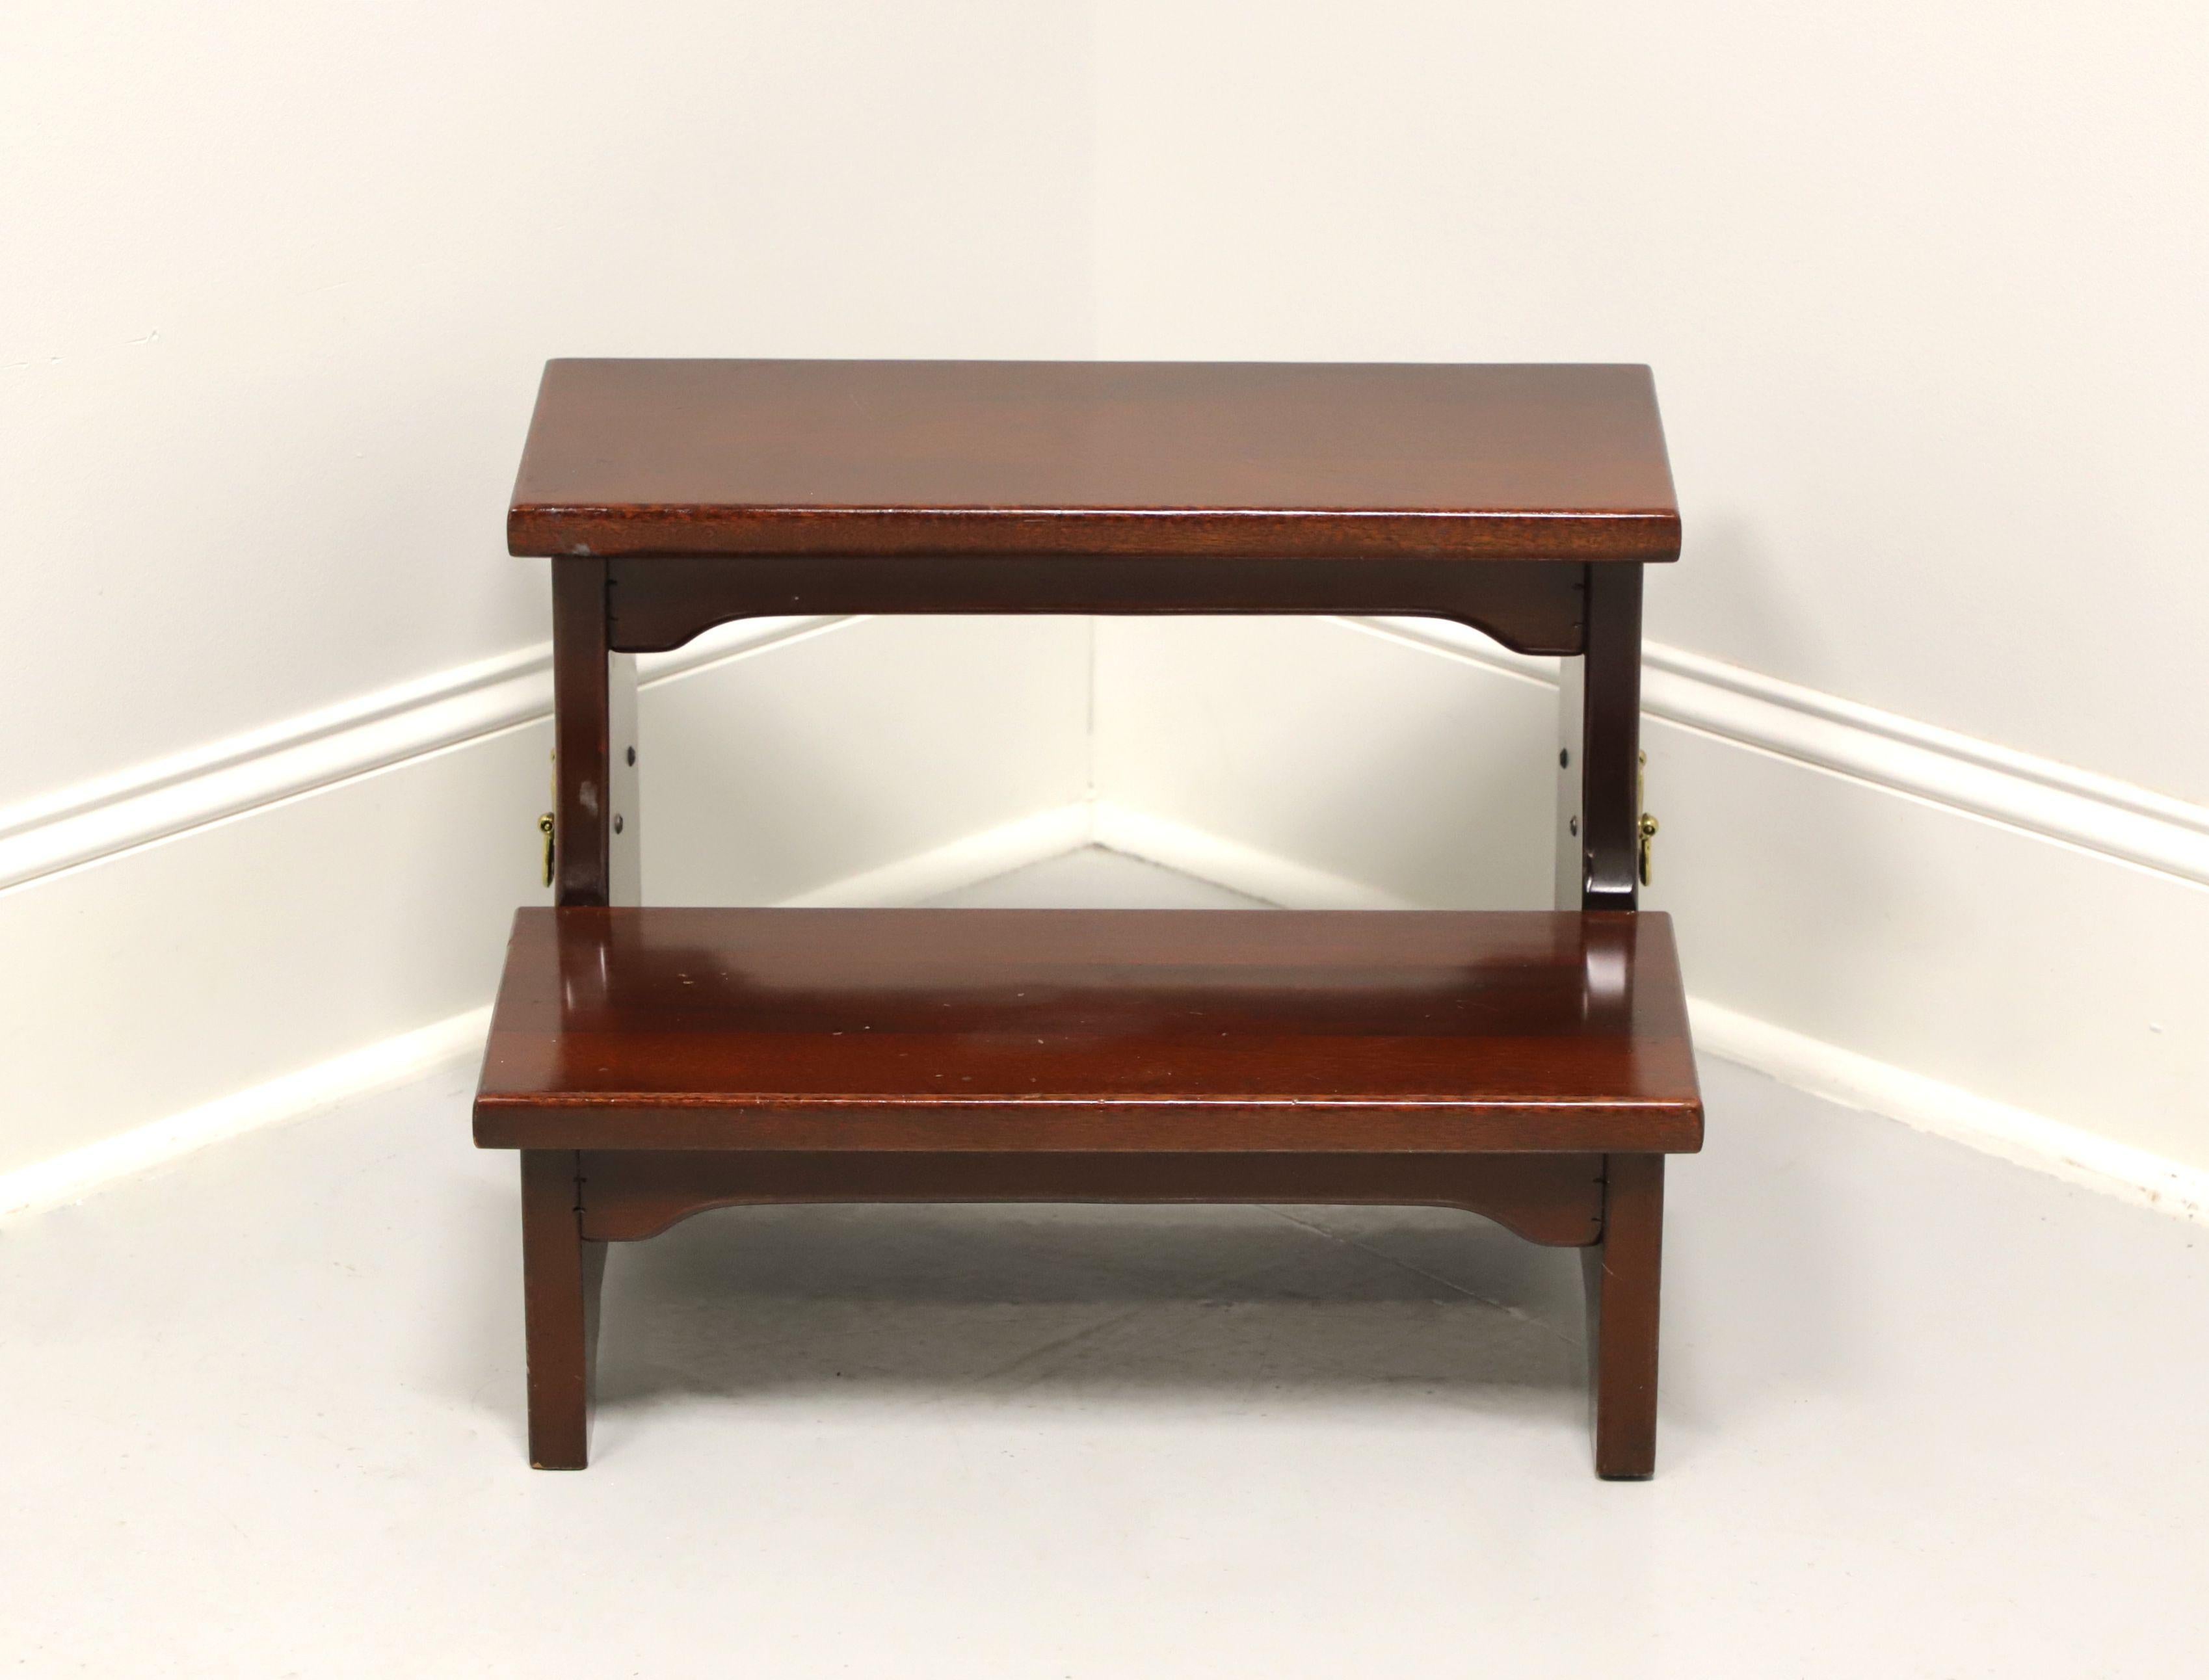 High quality bed steps in the Chippendale style by Link-Taylor. Solid heirloom mahogany, brass side handles and two step risers. Made in Lexington, North Carolina, USA, in the late 20th Century.

Style #: 910-940

Measures: 20 W 17.25 D 14 H

Very